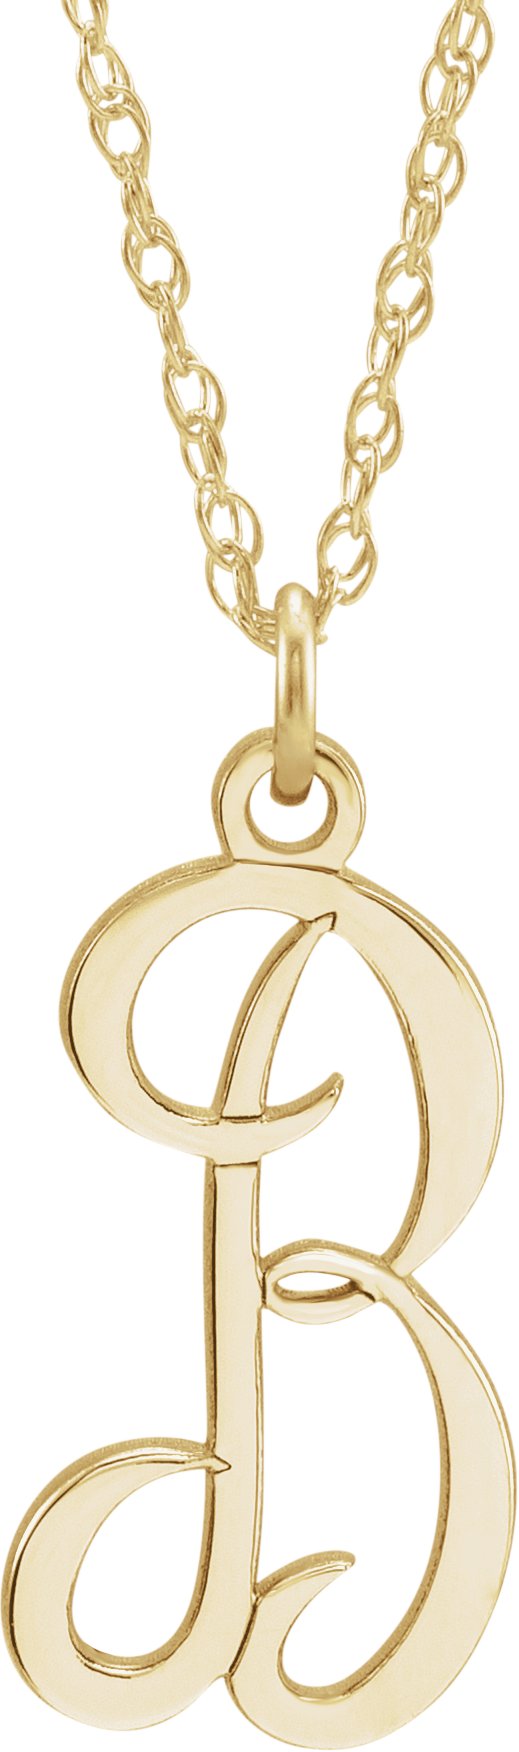 14K Yellow Gold-Plated Sterling Silver Script Initial B 16-18" Necklace